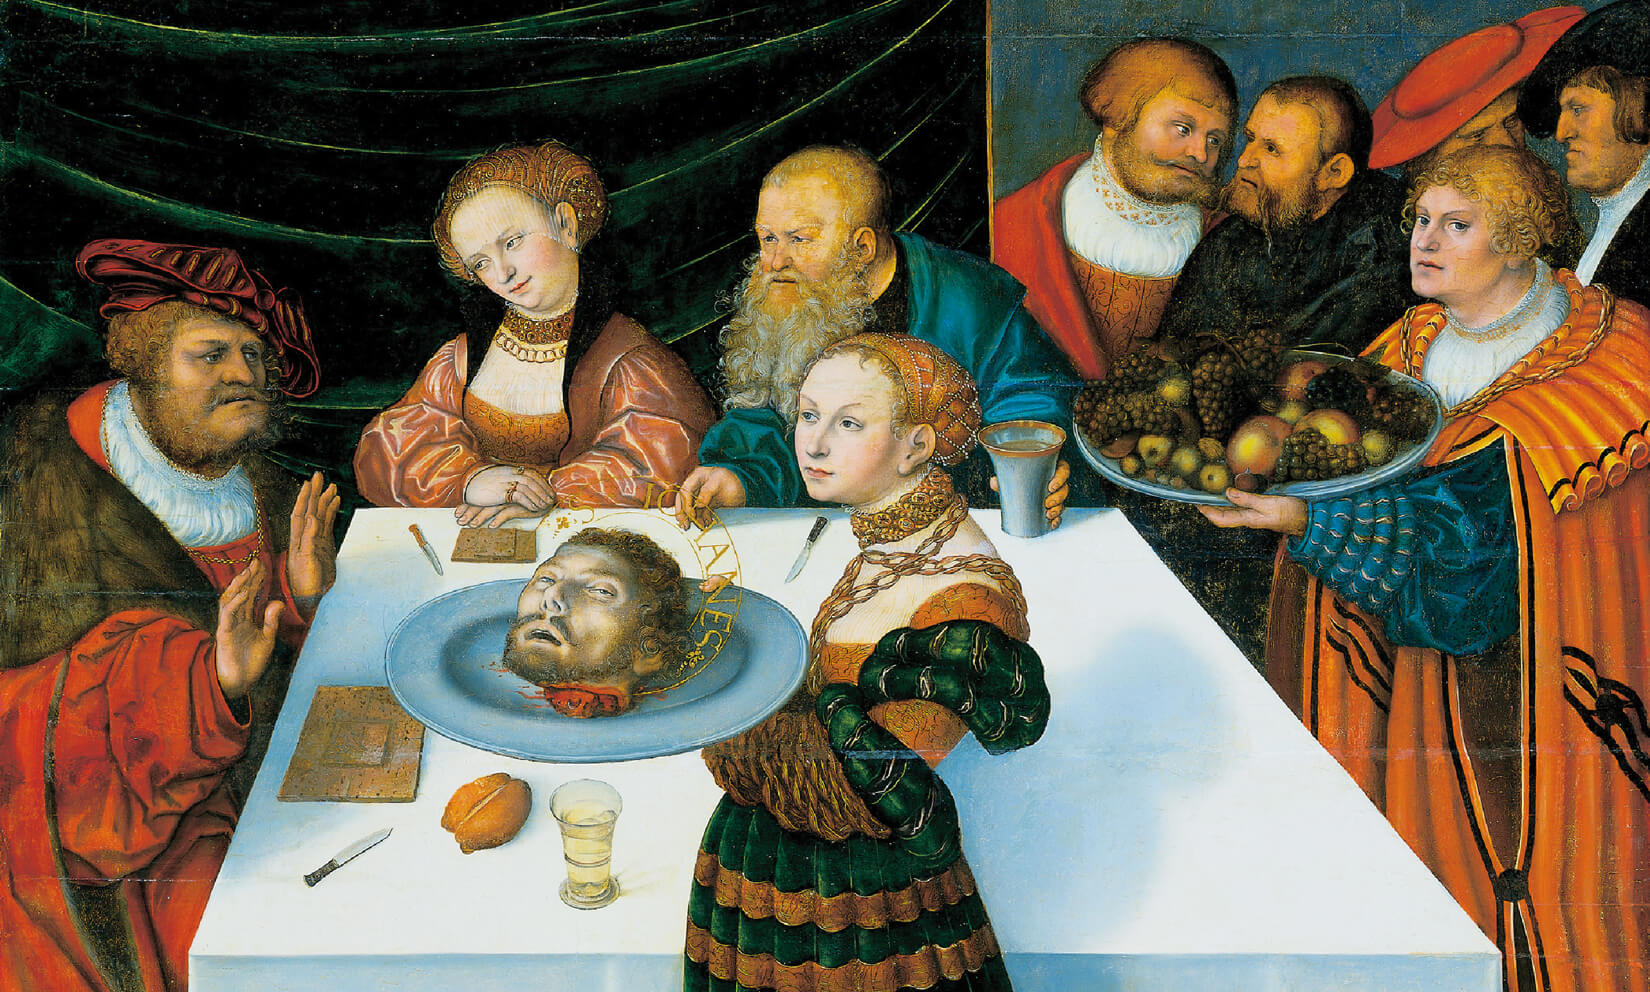 A detail image from Lucas Cranach the Elder’s fifteen thirty three “Herod’s Banquet,” showing the display of St. John the Baptist’s head on a platter.